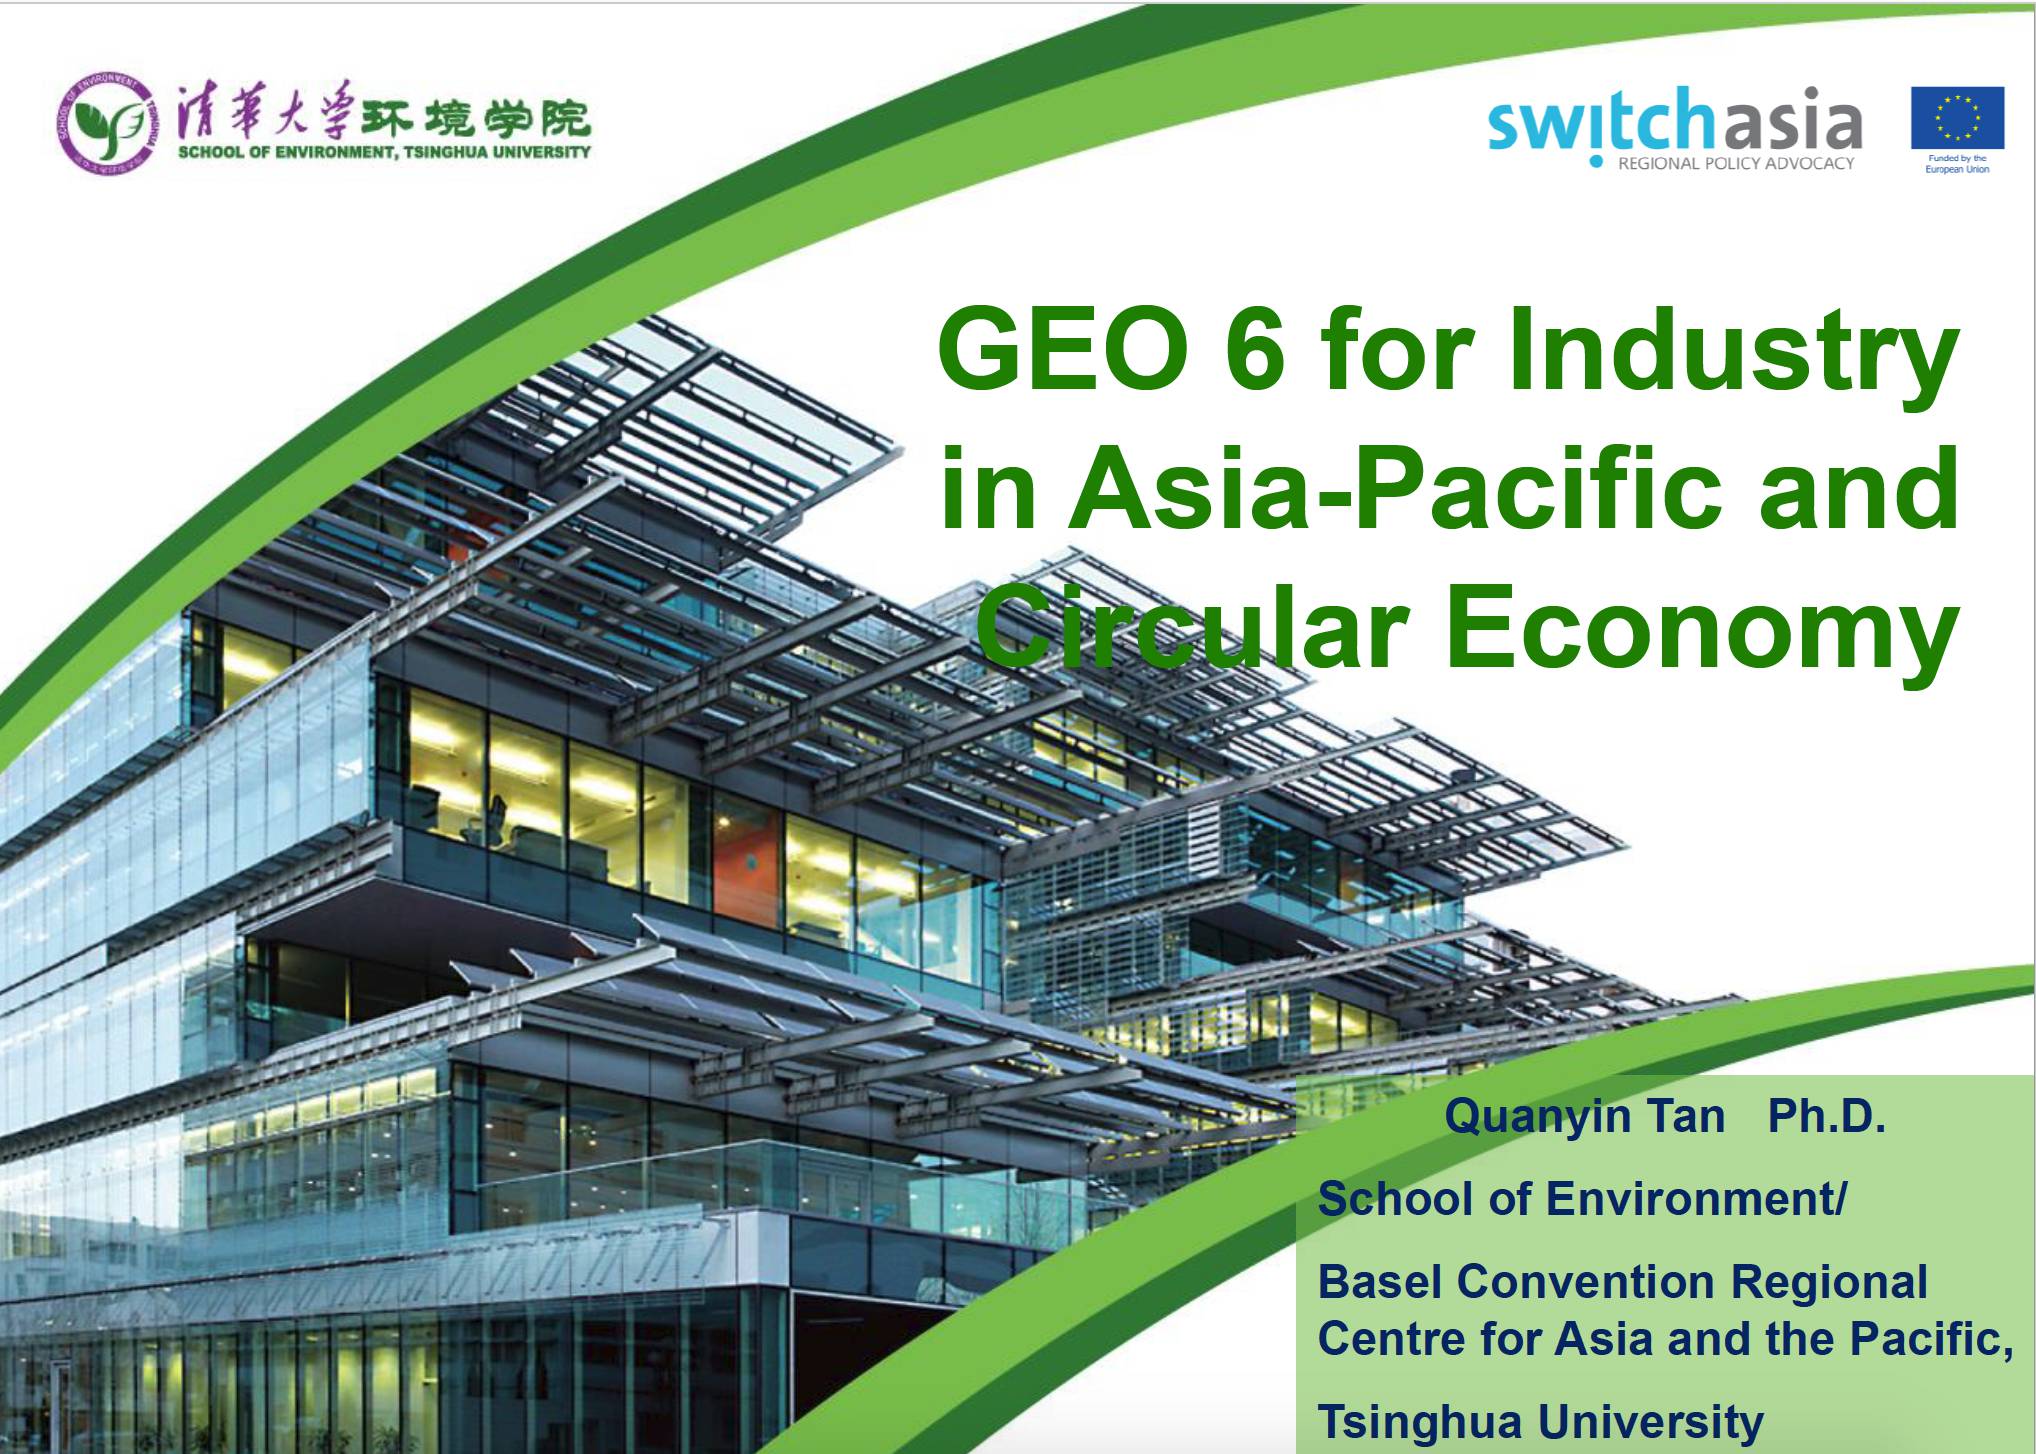 GEO 6 for Industry in Asia Pacific and Circular Economy